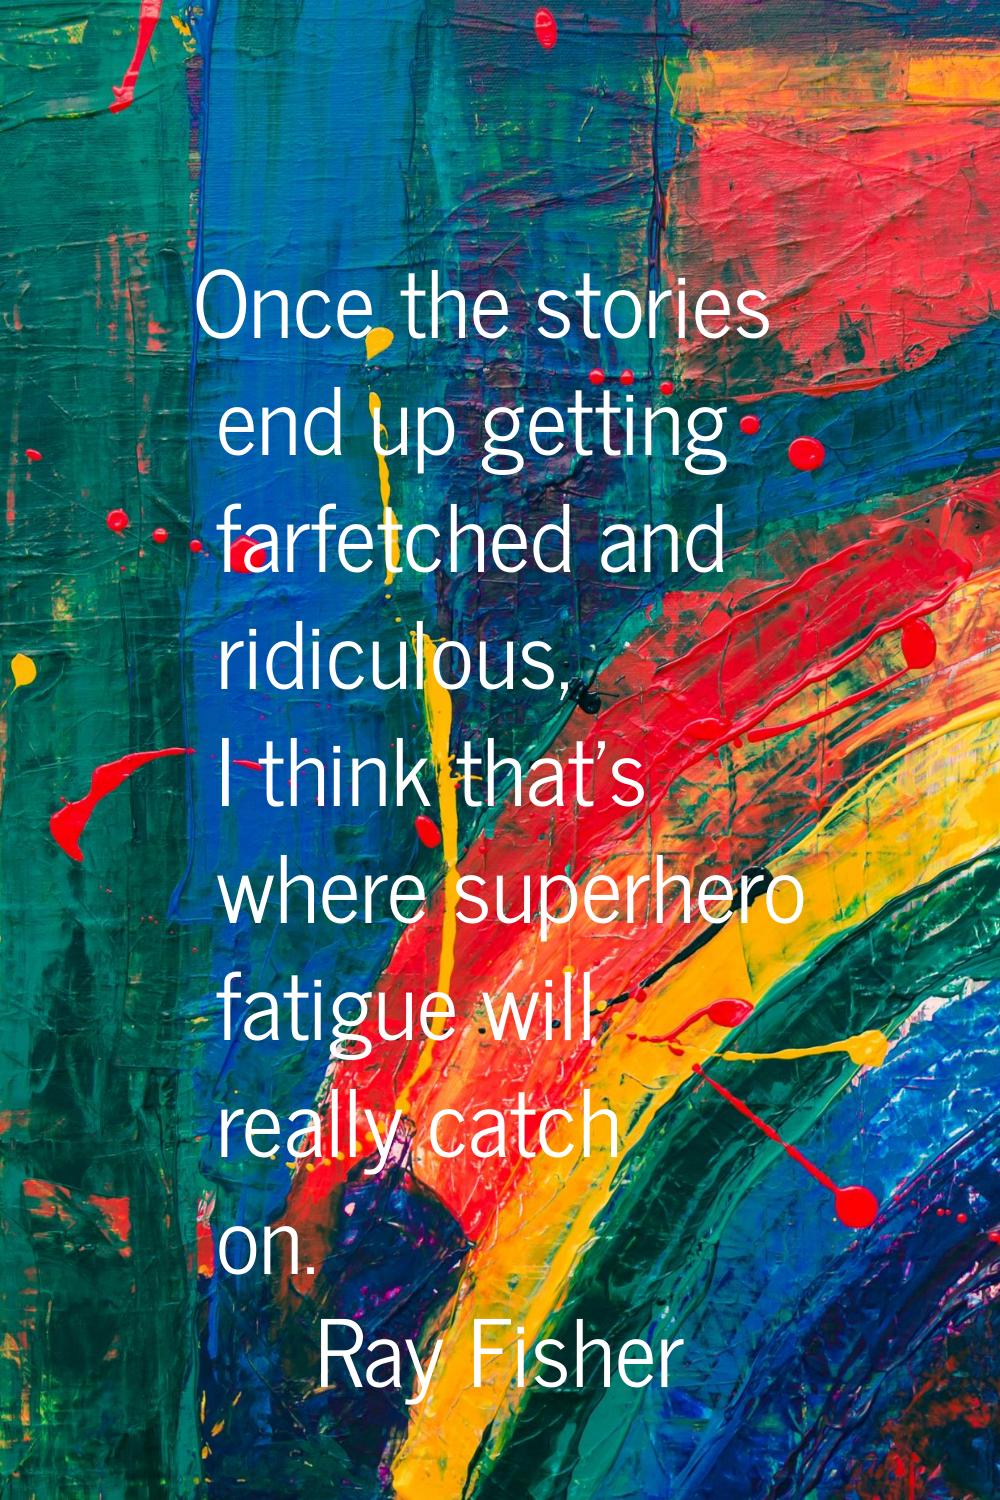 Once the stories end up getting farfetched and ridiculous, I think that's where superhero fatigue w